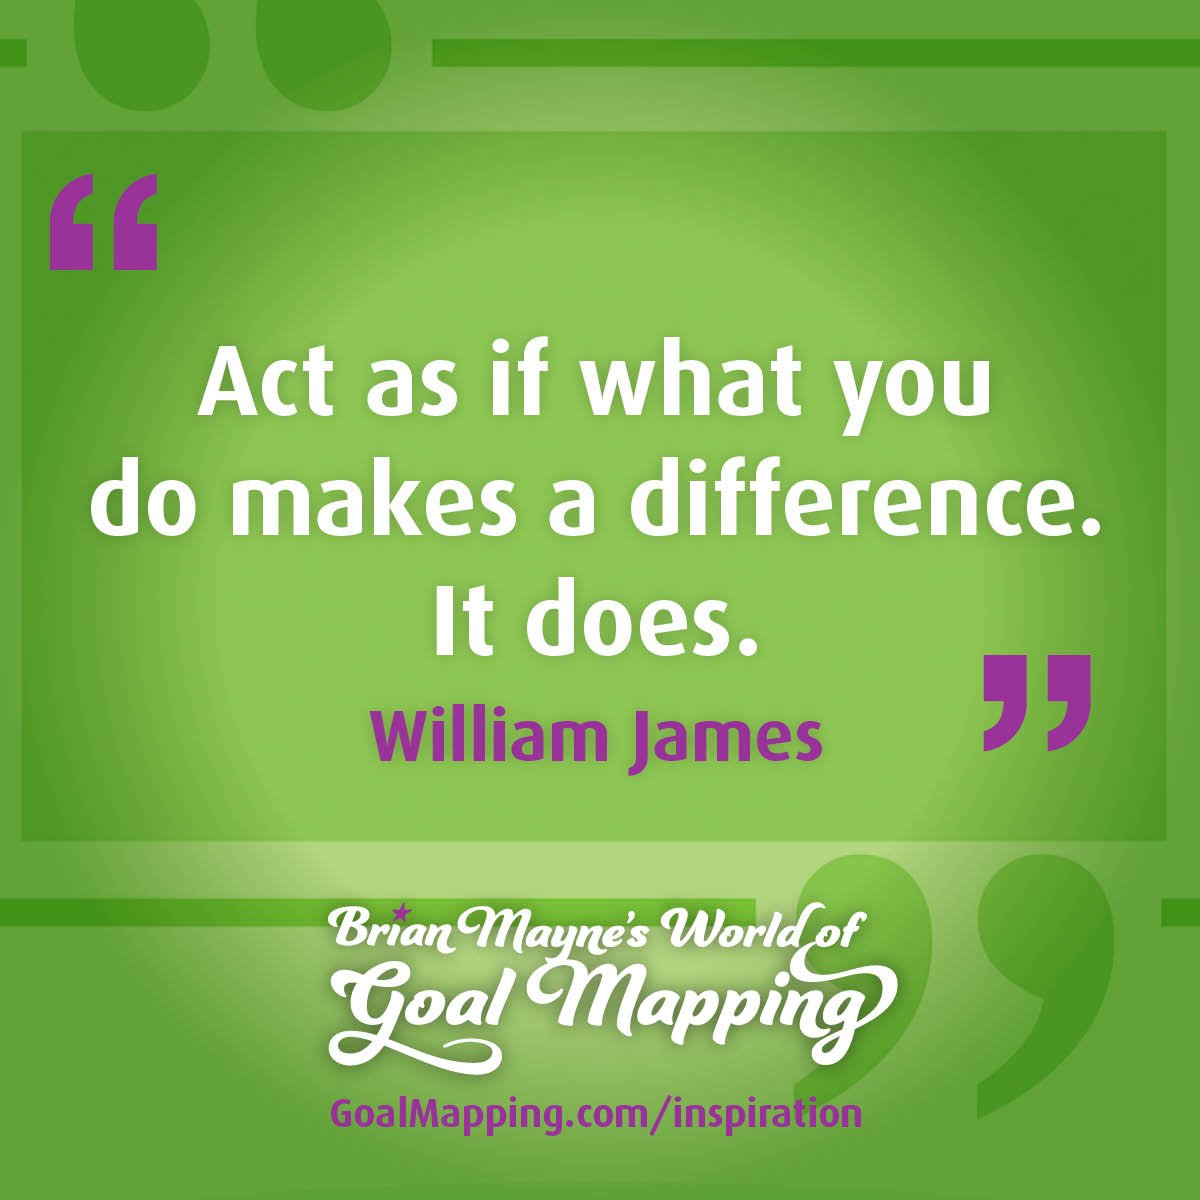 "Act as if what you do makes a difference. It does." William James